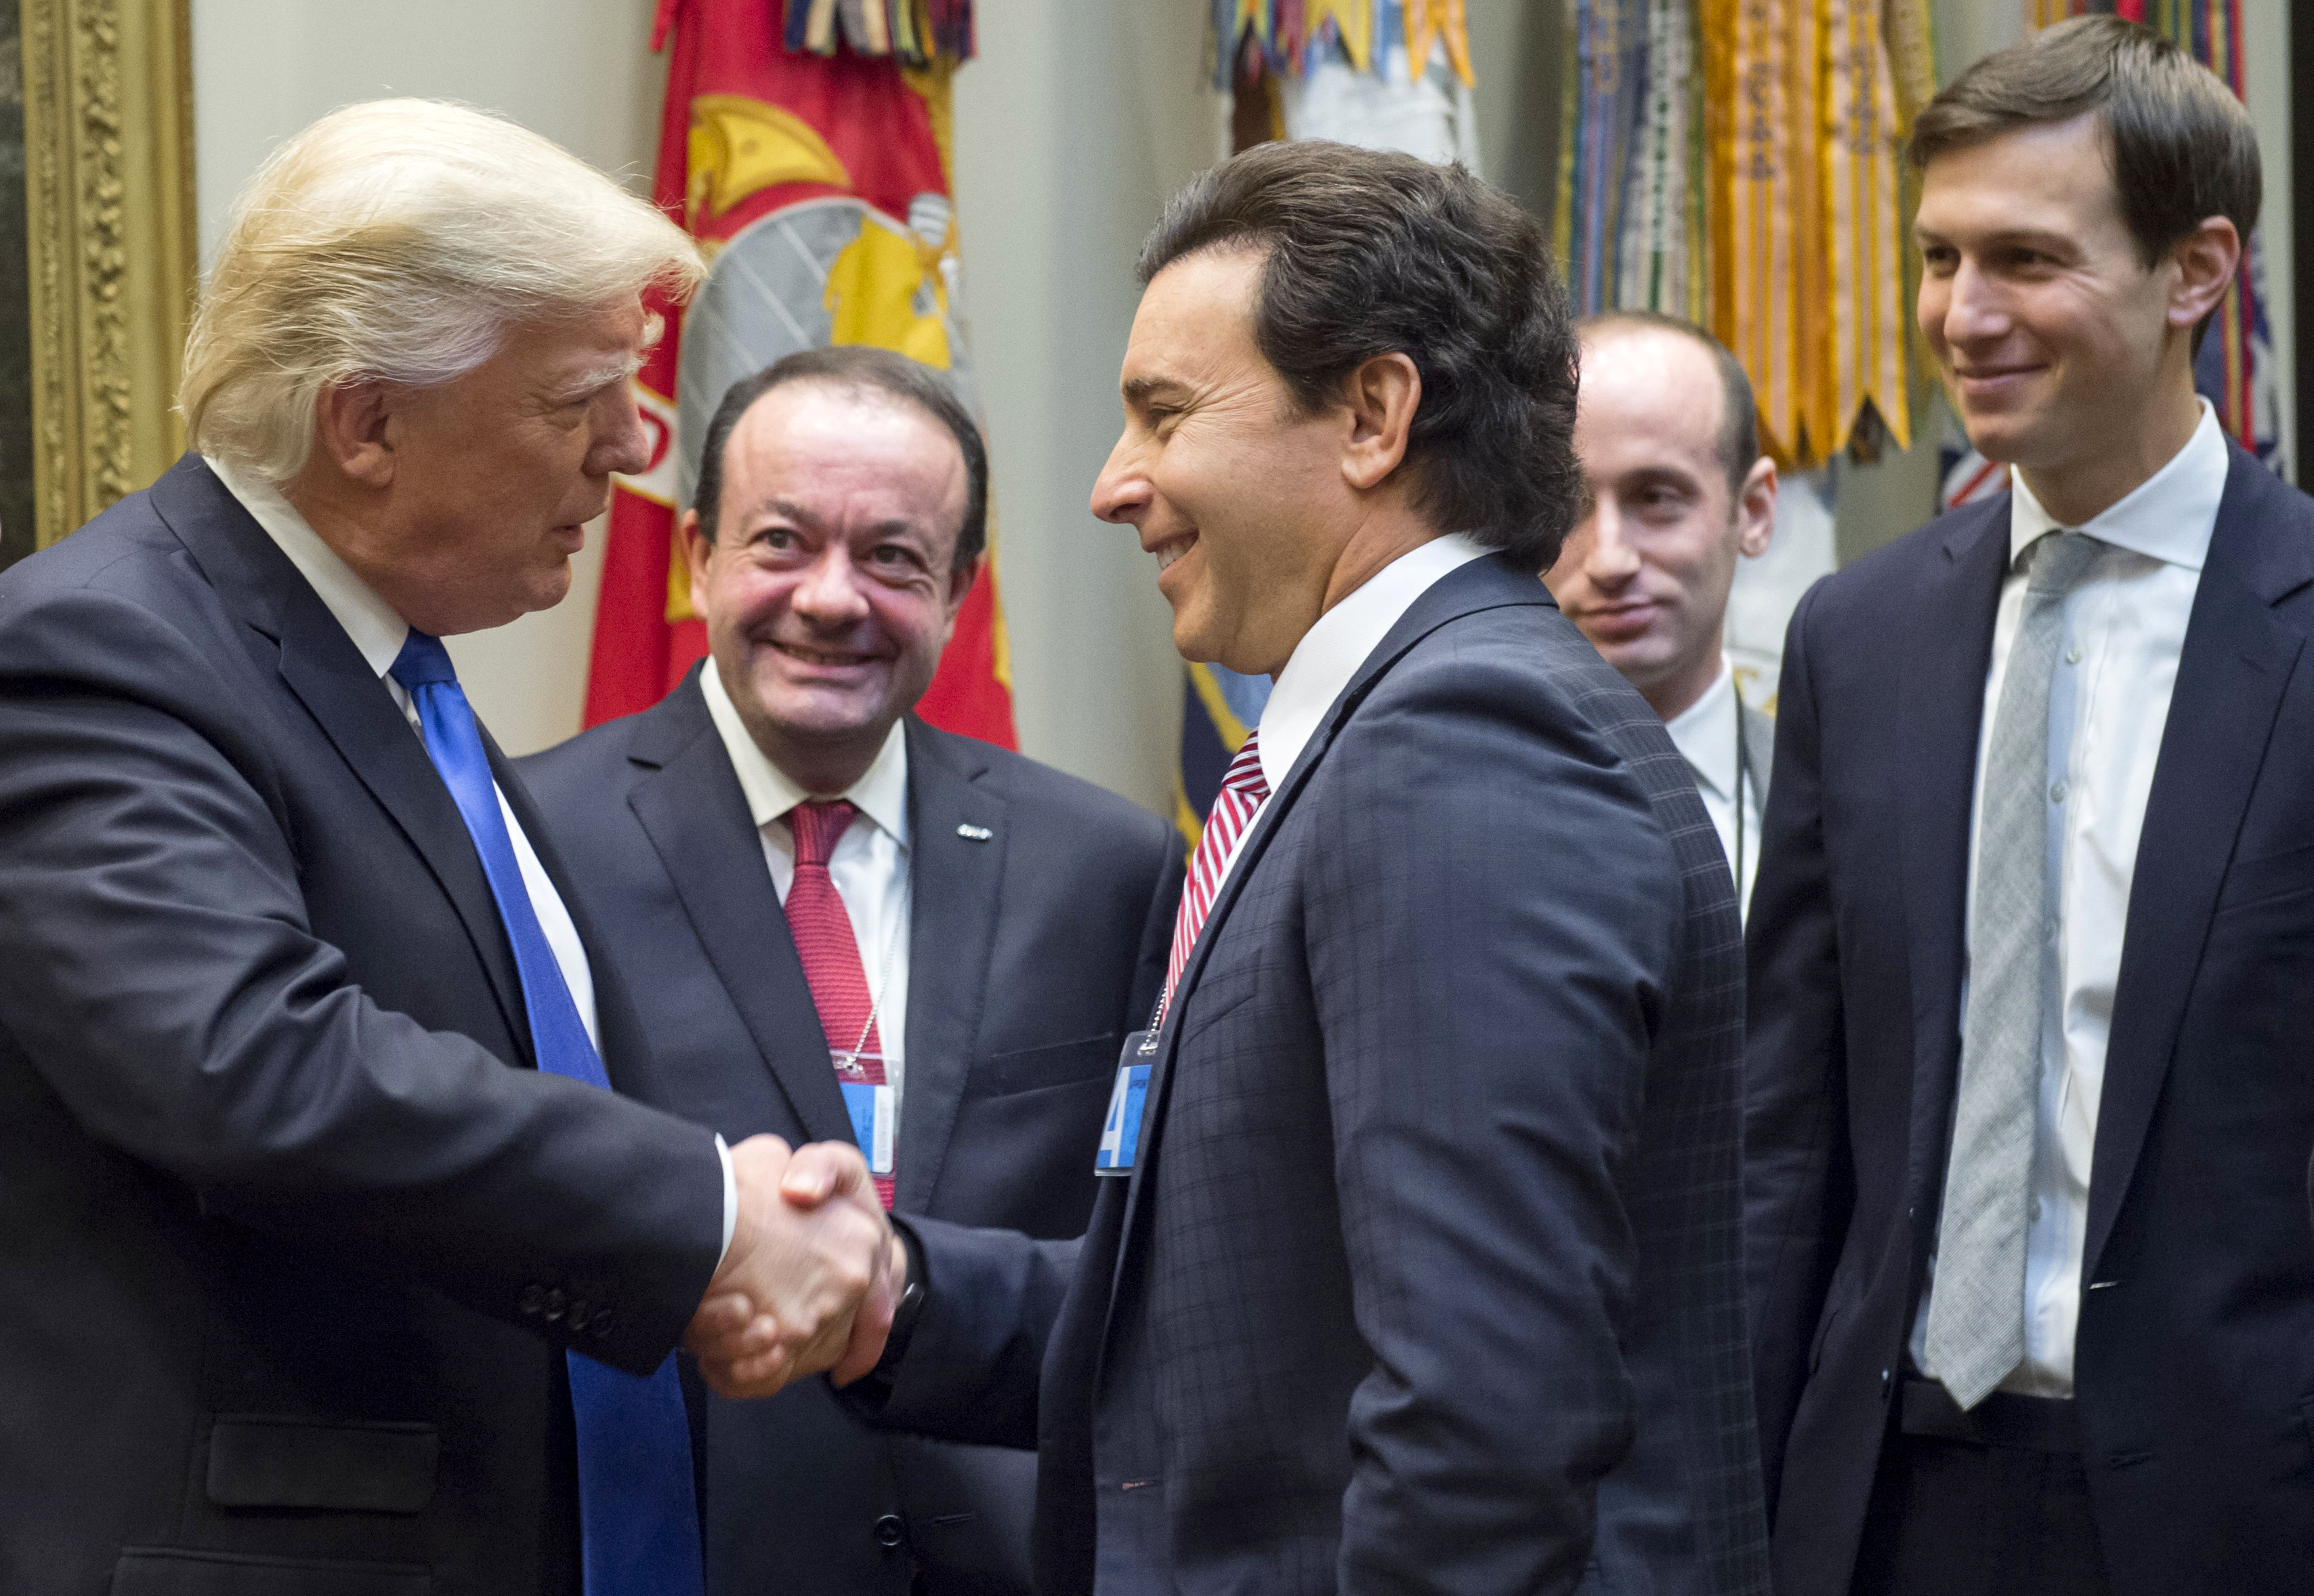 US President Donald Trump greets Ford President and CEO Mark Fields (C) prior to a meeting with automobile industry leaders in the Roosevelt Room of the White House in Washington, DC, January 24, 2017. (Photo: SAUL LOEB/AFP/Getty Images)